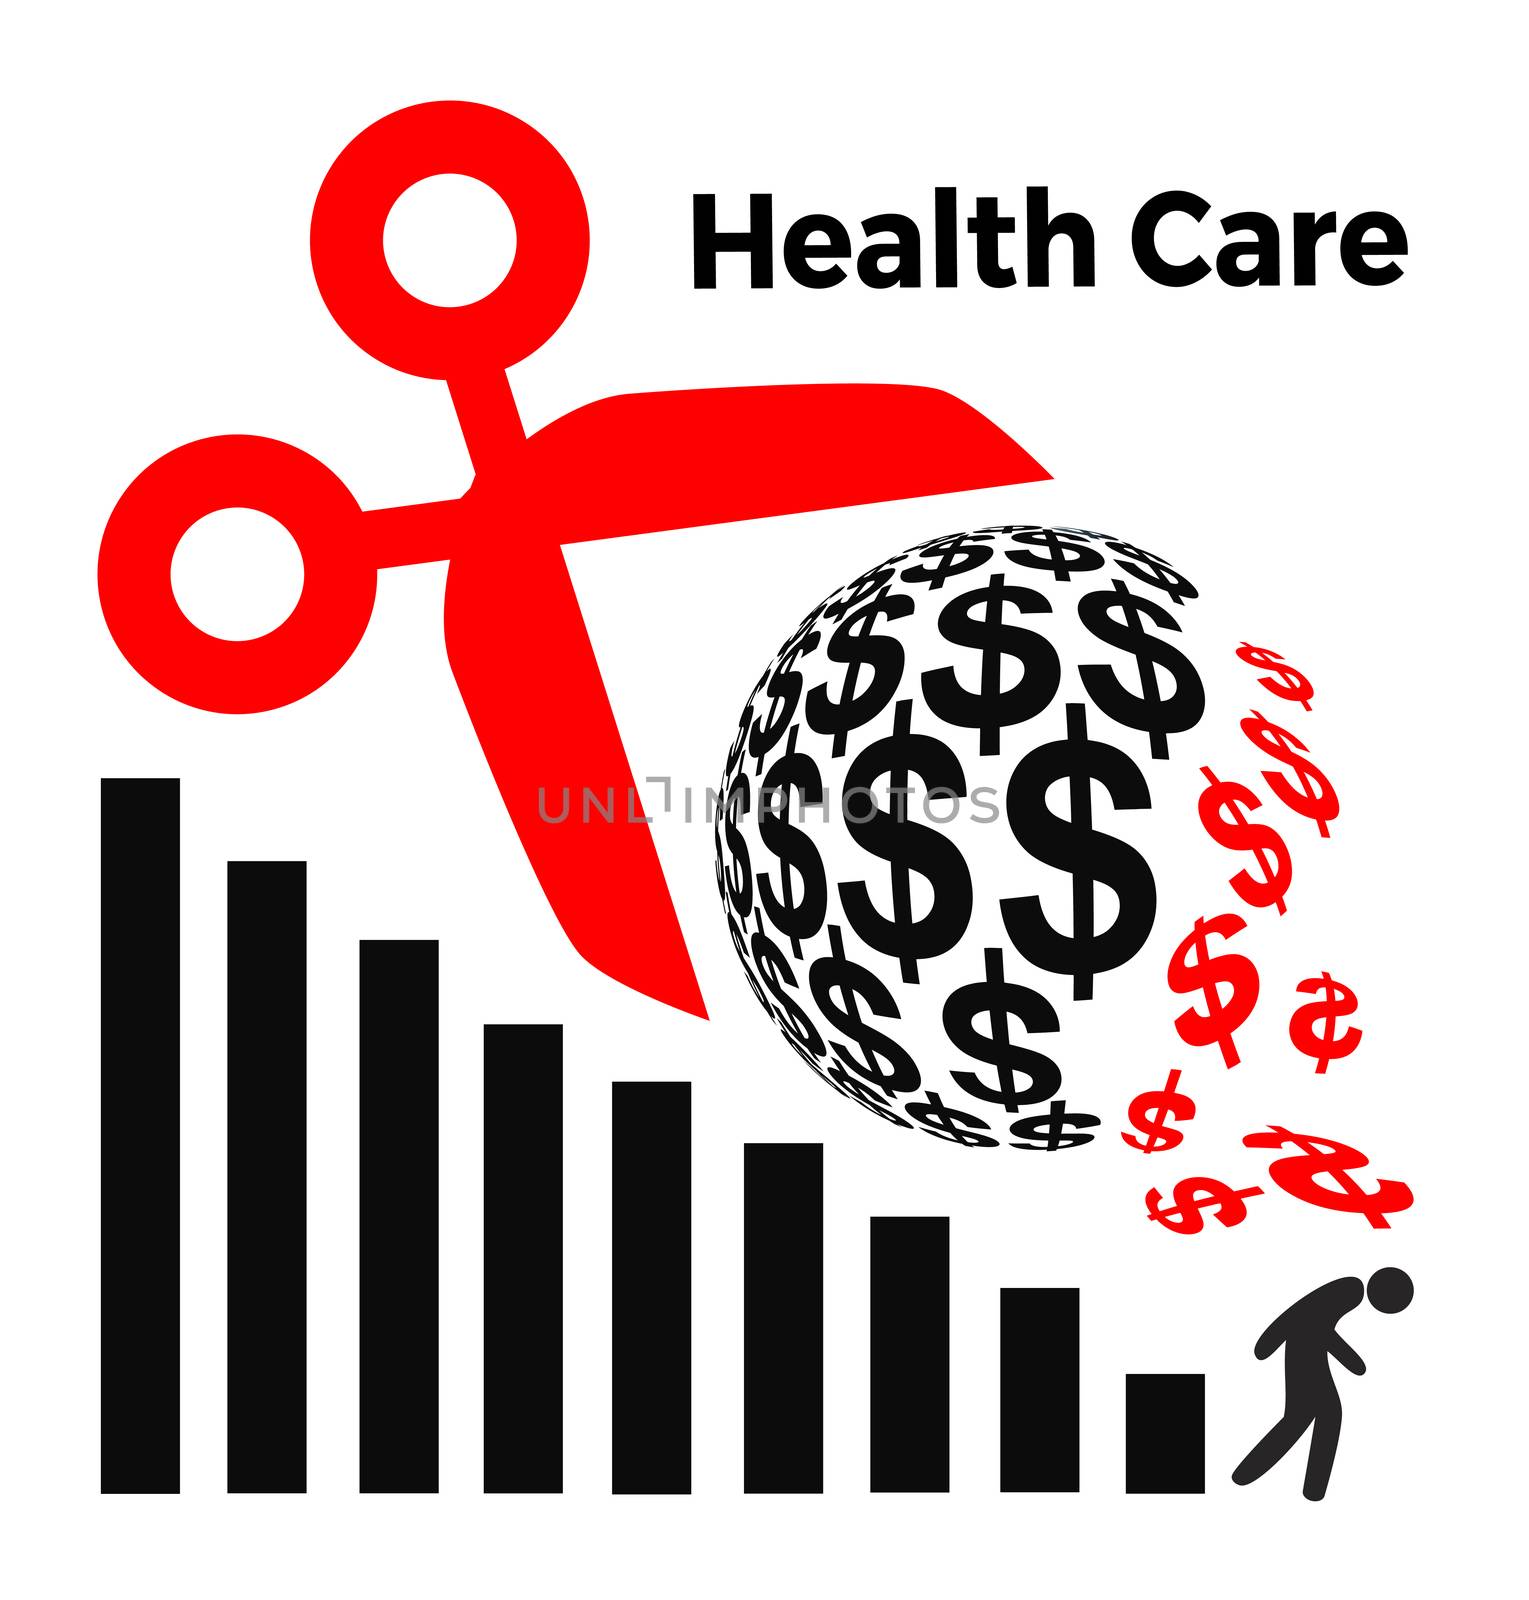 Cuts in Health Care Spending by Bambara